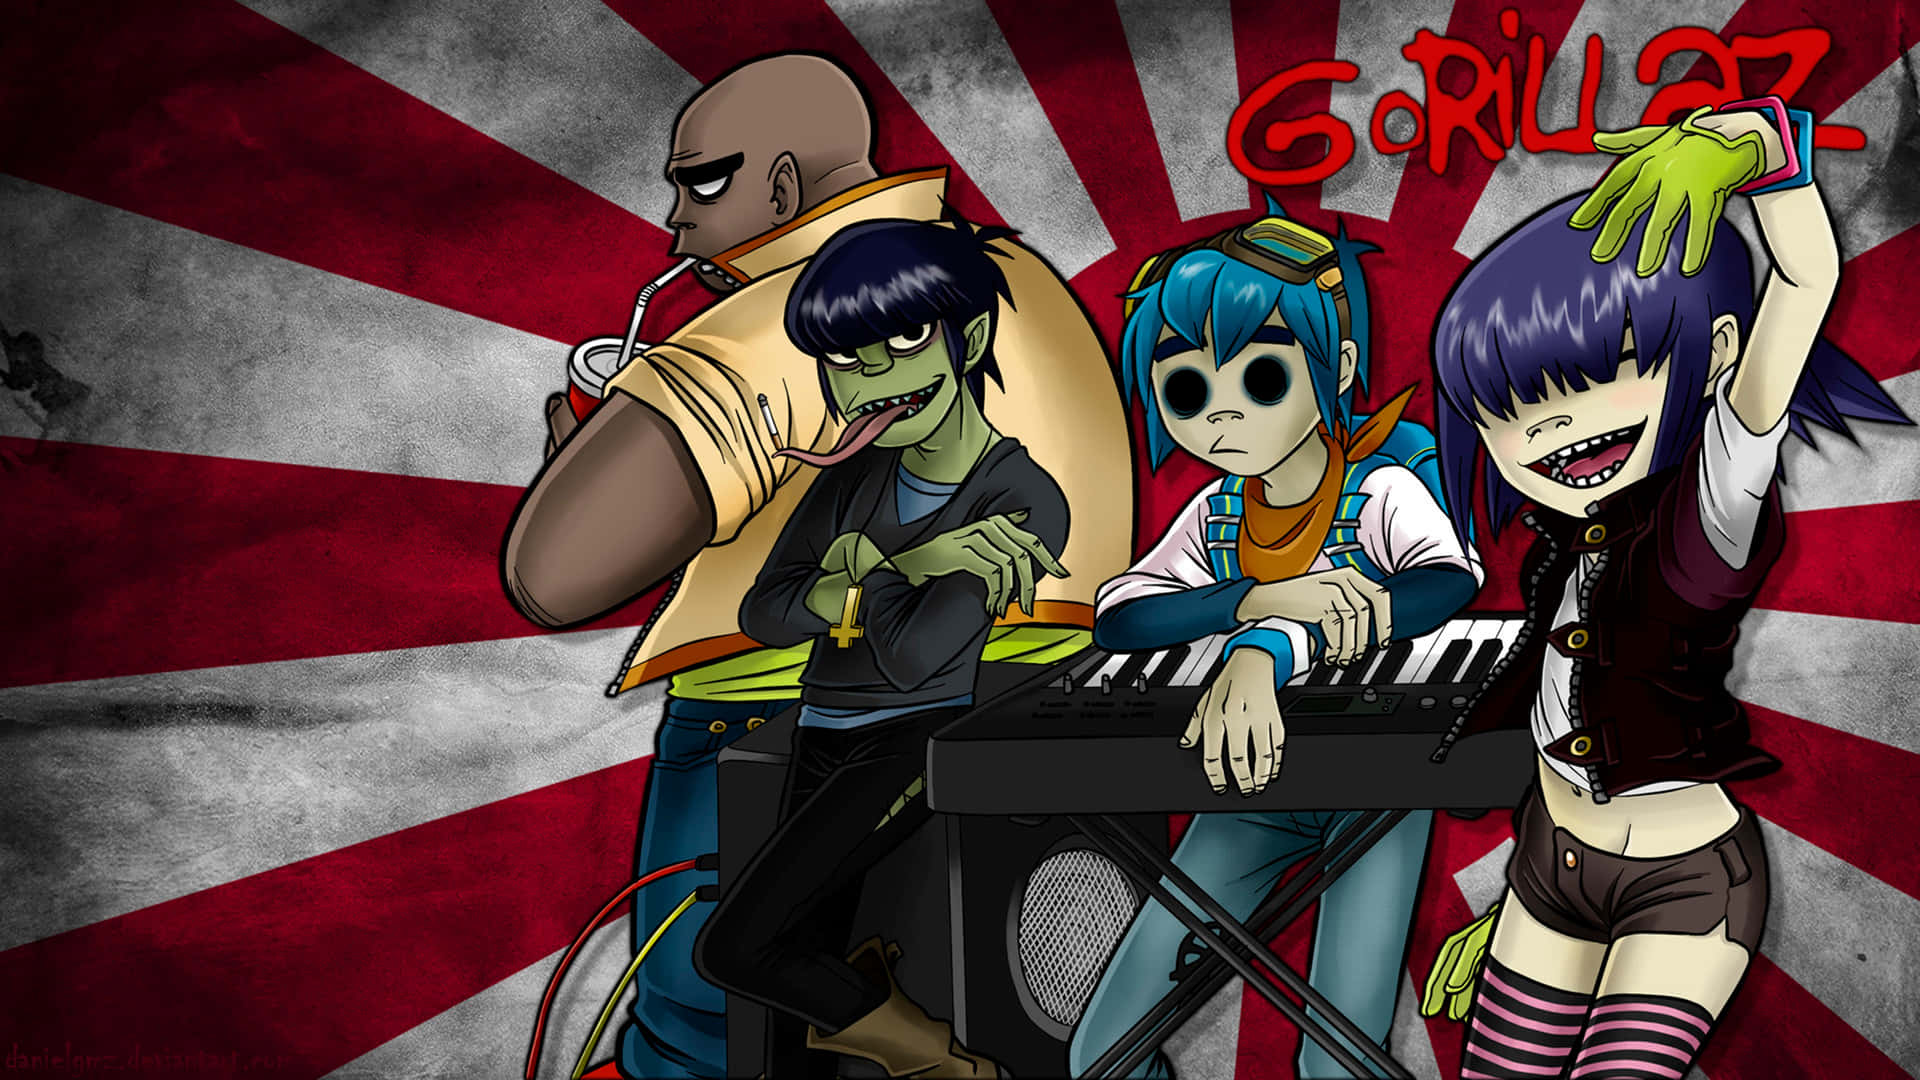 From left to right: Murdoc Niccals, 2D, Noodle and Russel from Gorillaz Wallpaper